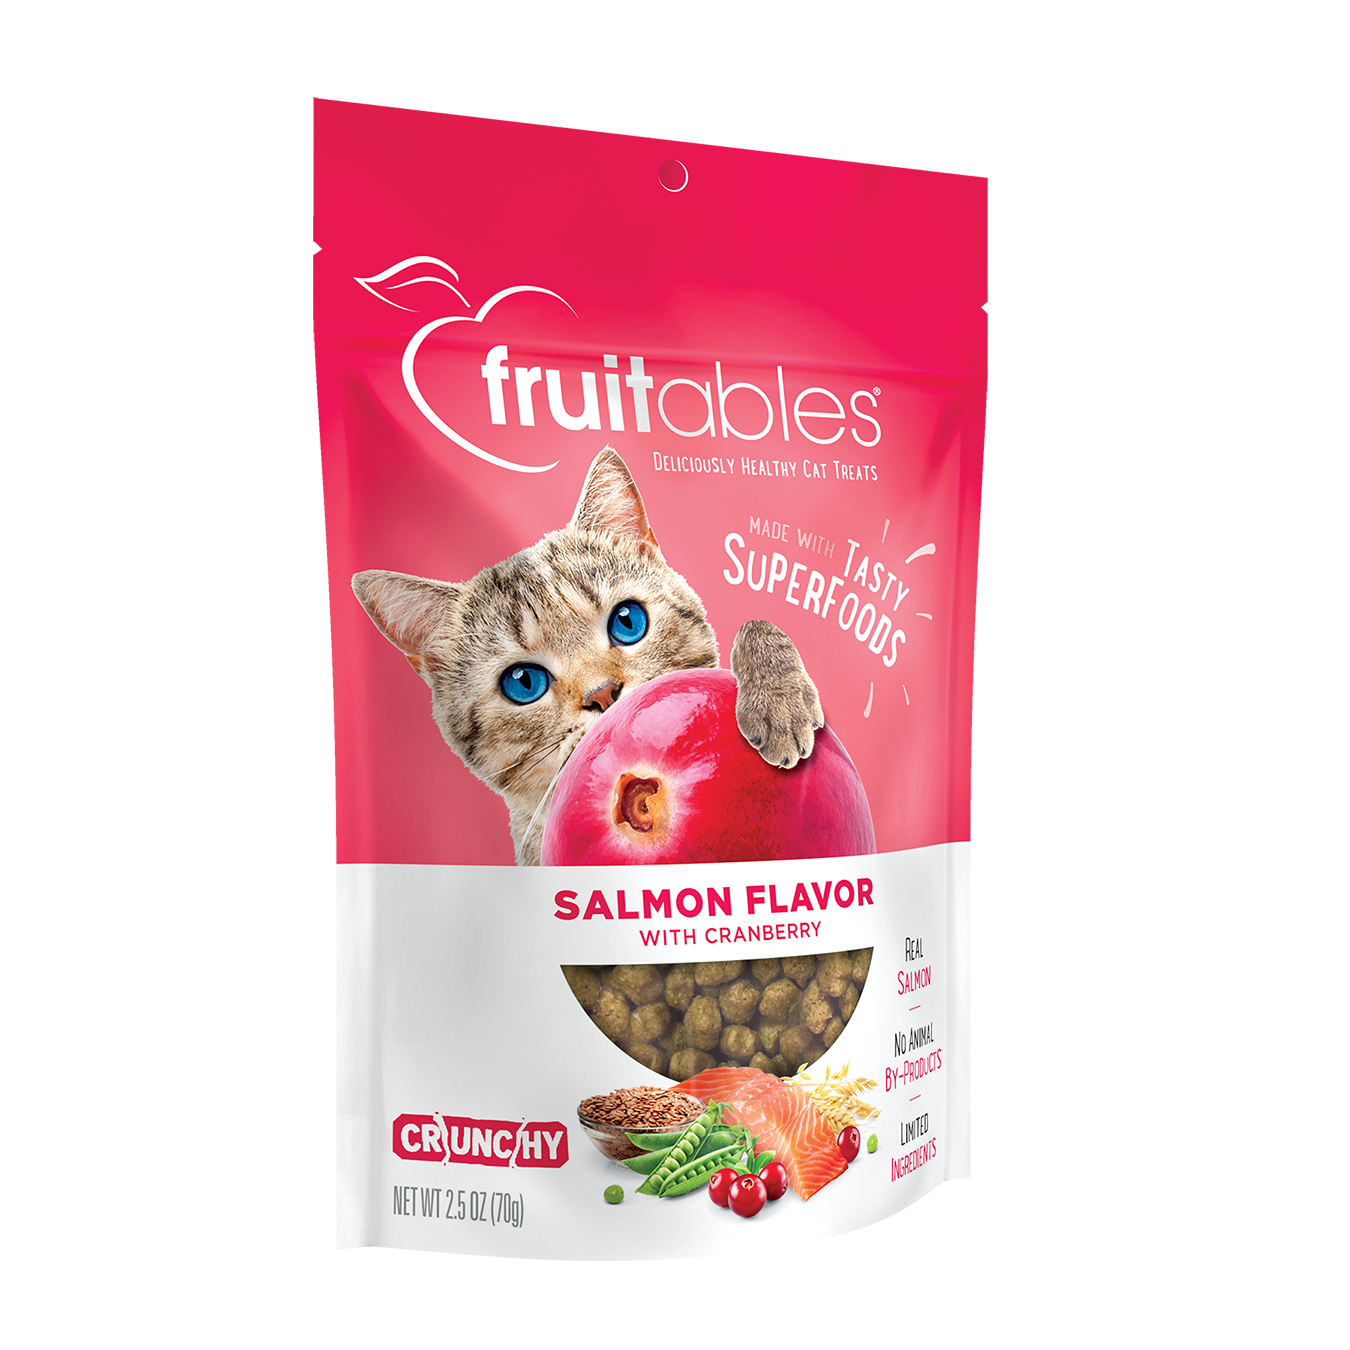 Our healthy snacks for cats come in tasty salmon cat treats